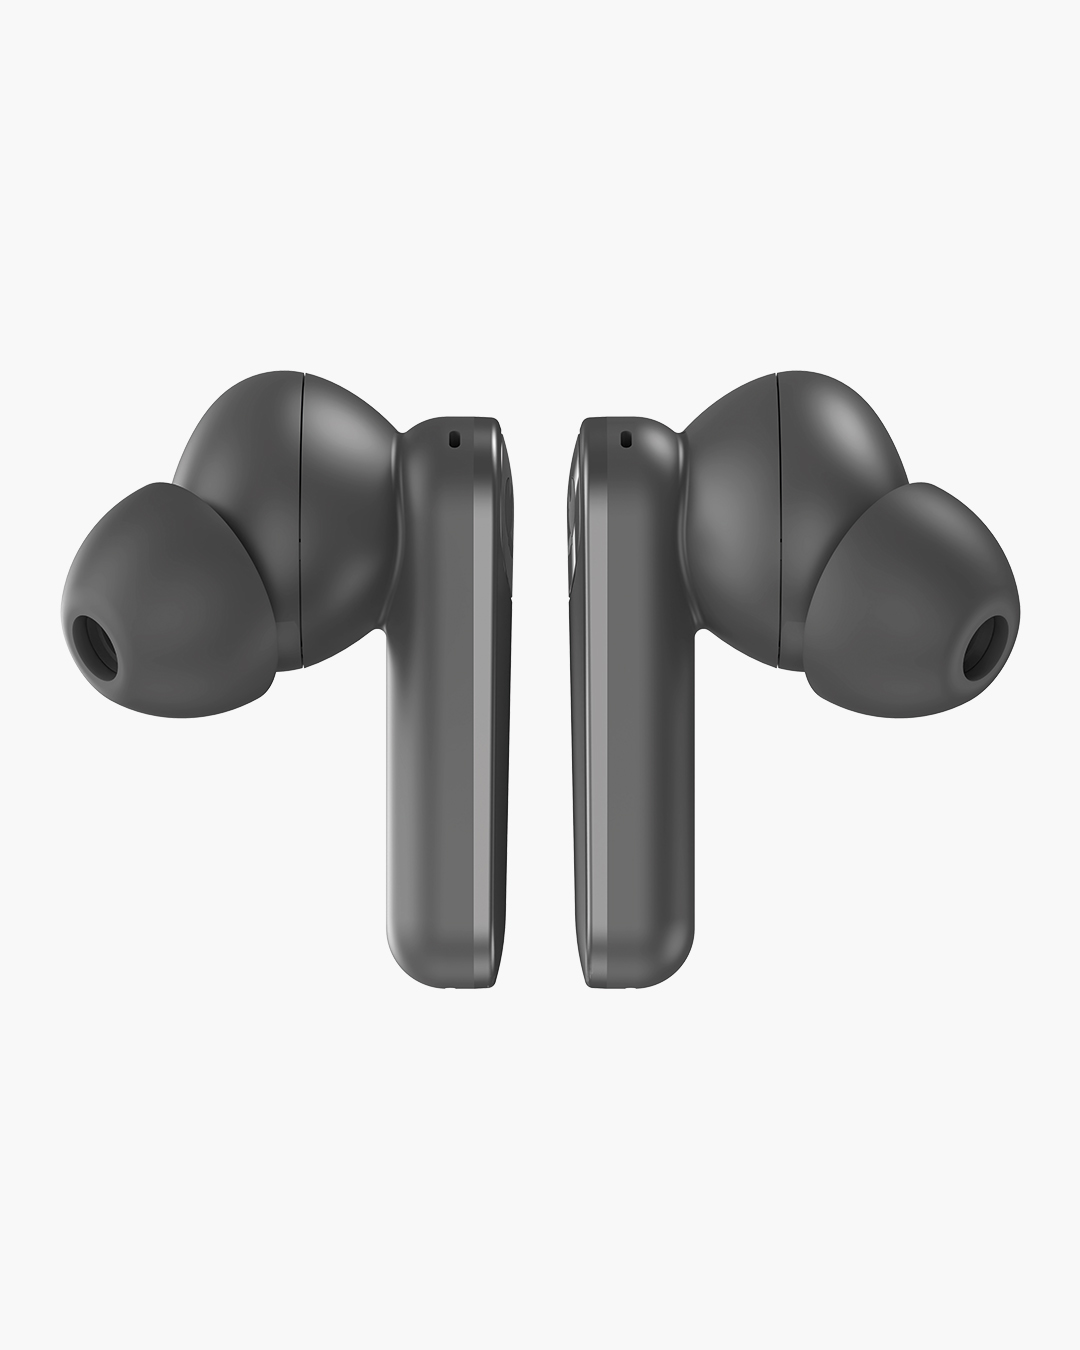 Fresh 'n Rebel - Twins ANC - True Wireless In-ear headphones with active noise cancelling - Storm Grey